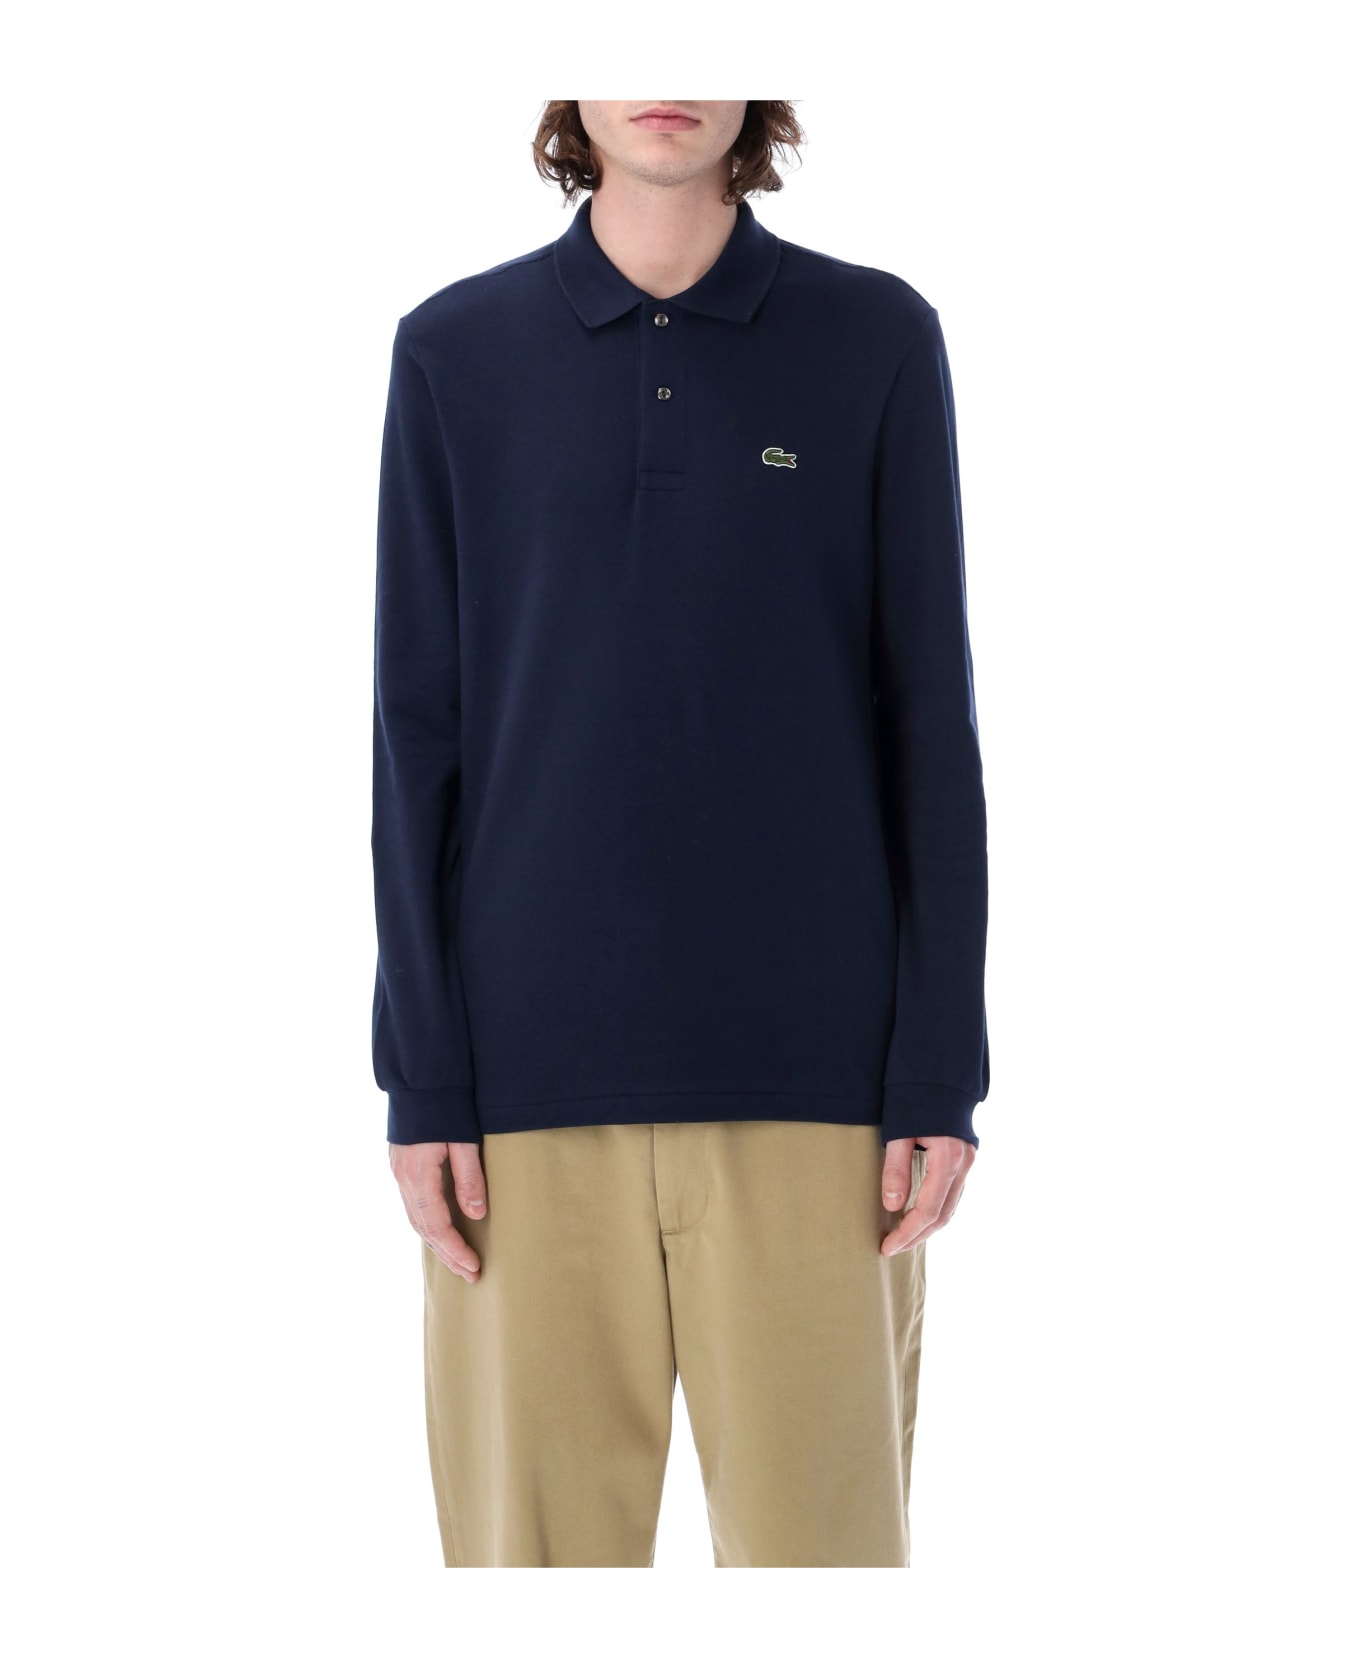 Lacoste Classic Fit L/s Polo Shirt - MARINE